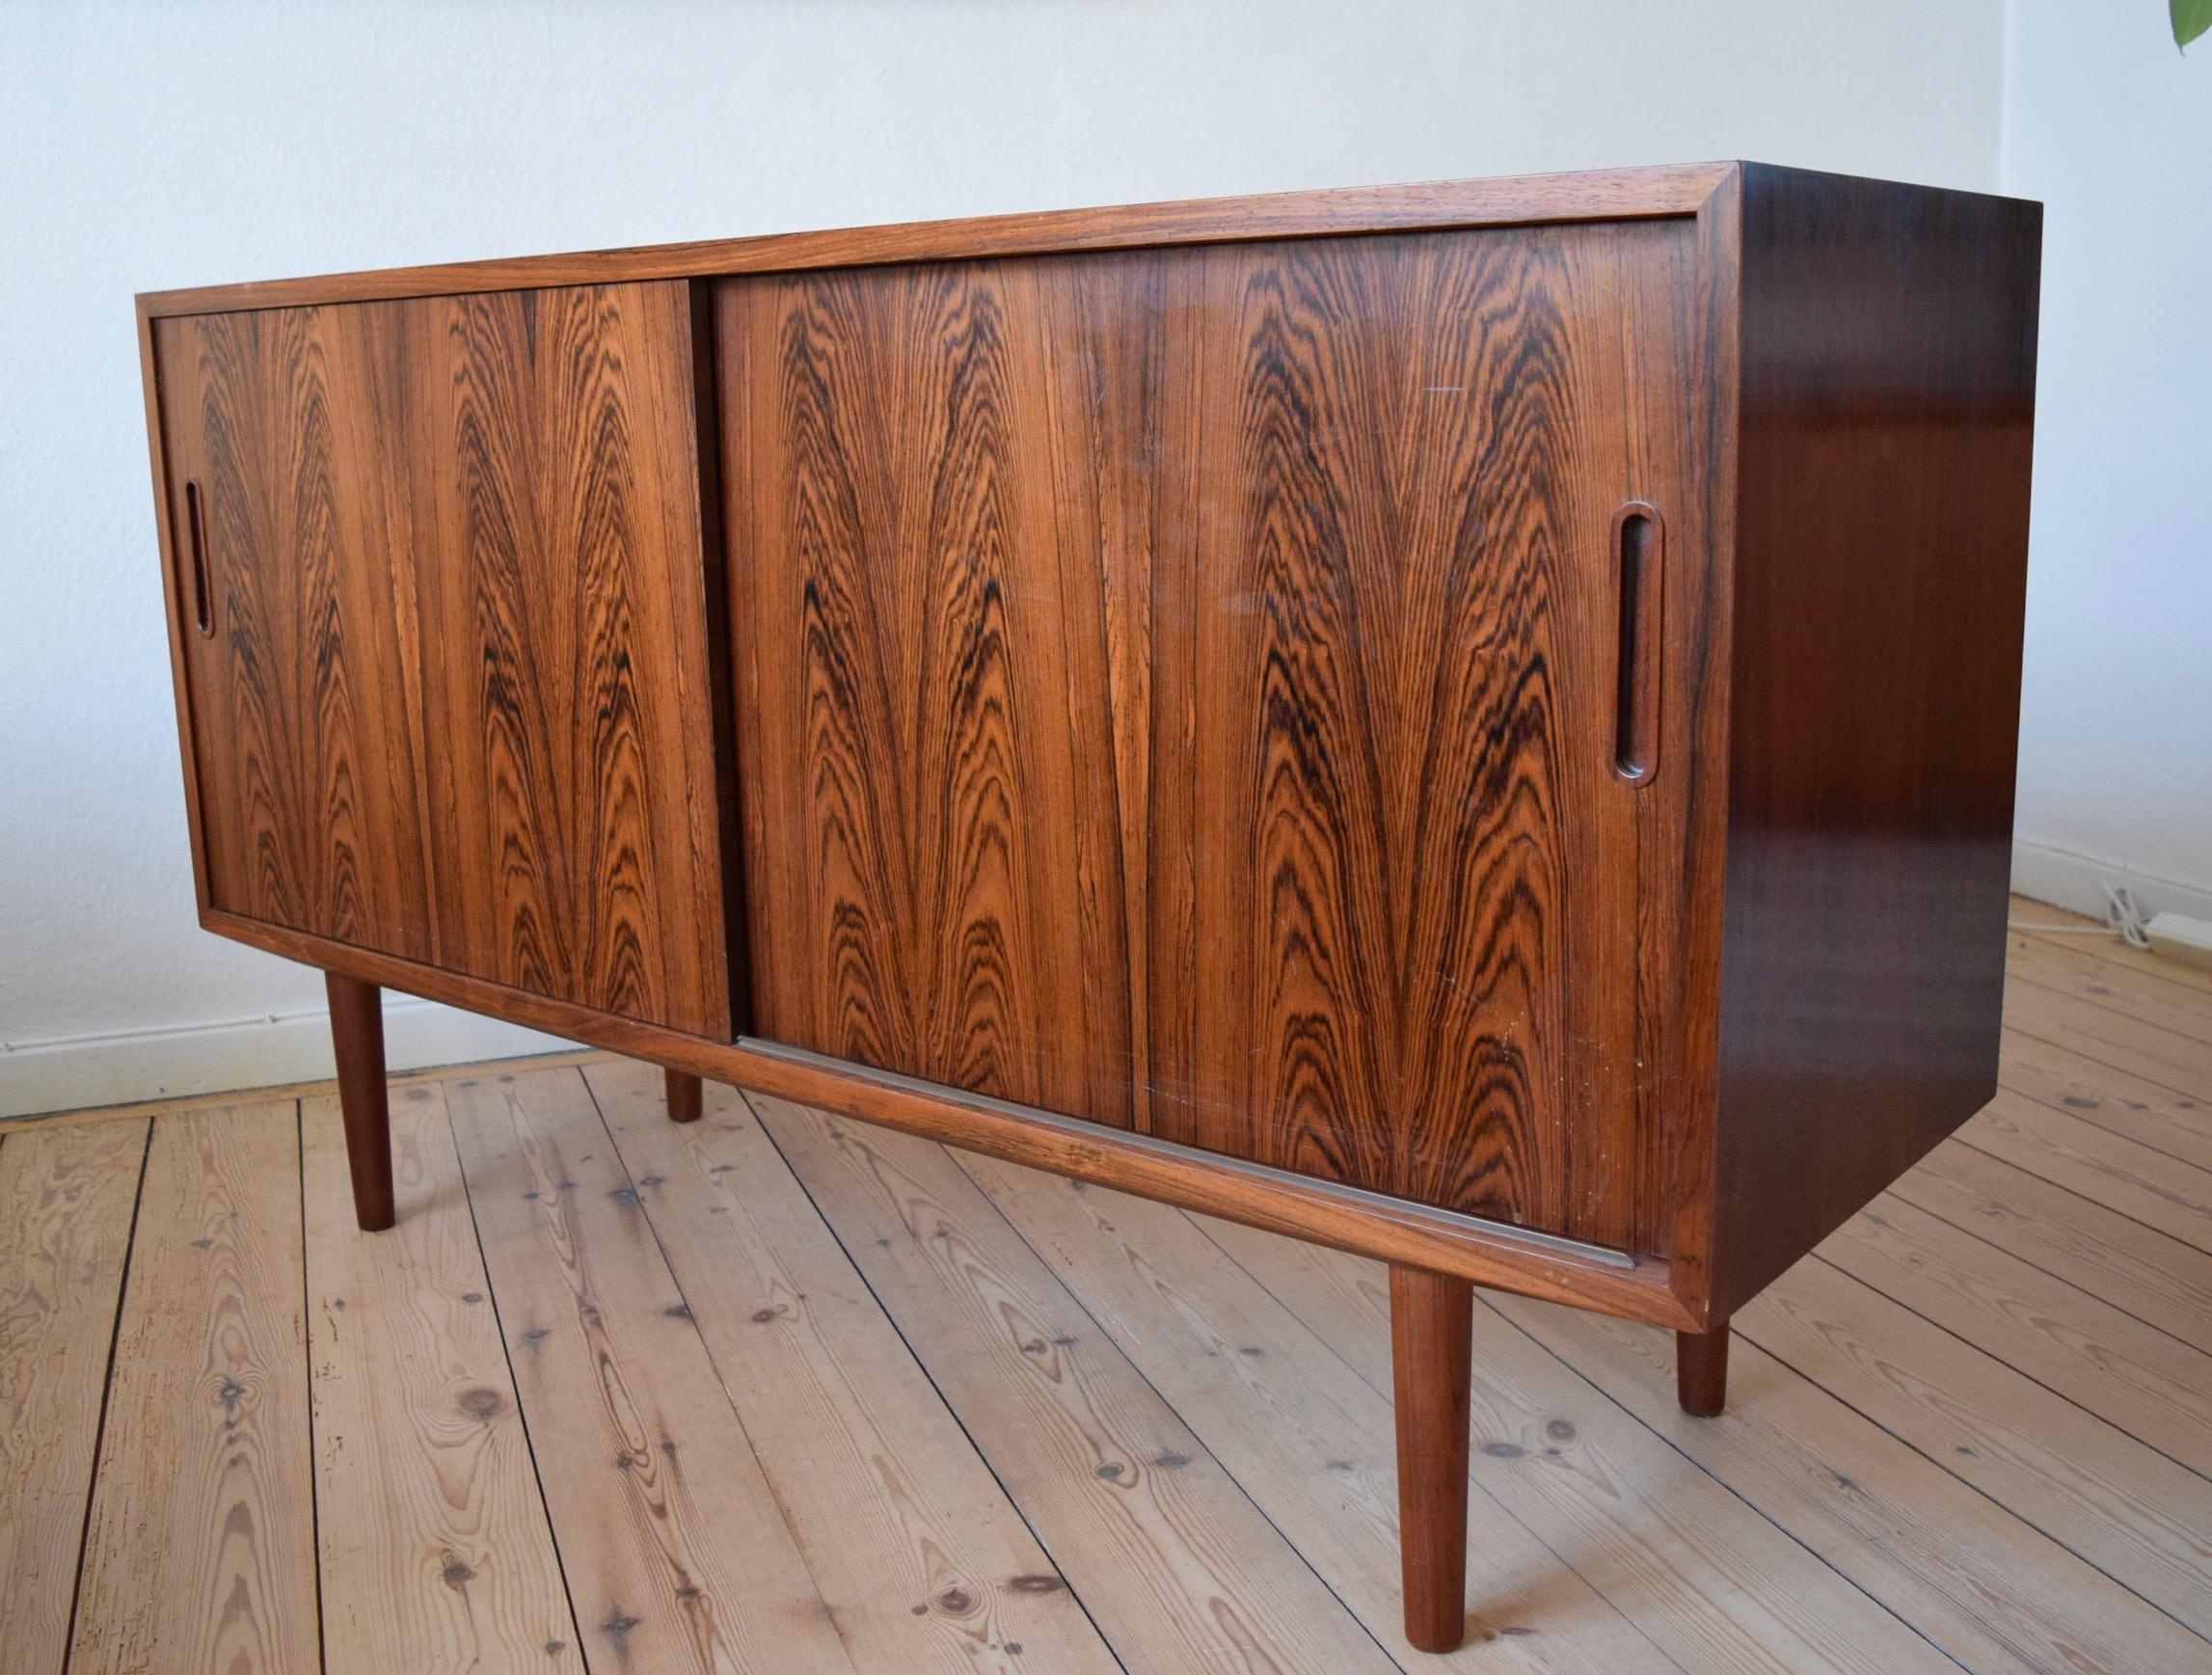 Danish Midcentury Rosewood Sideboard by Poul Hundevad, 1960s For Sale 1